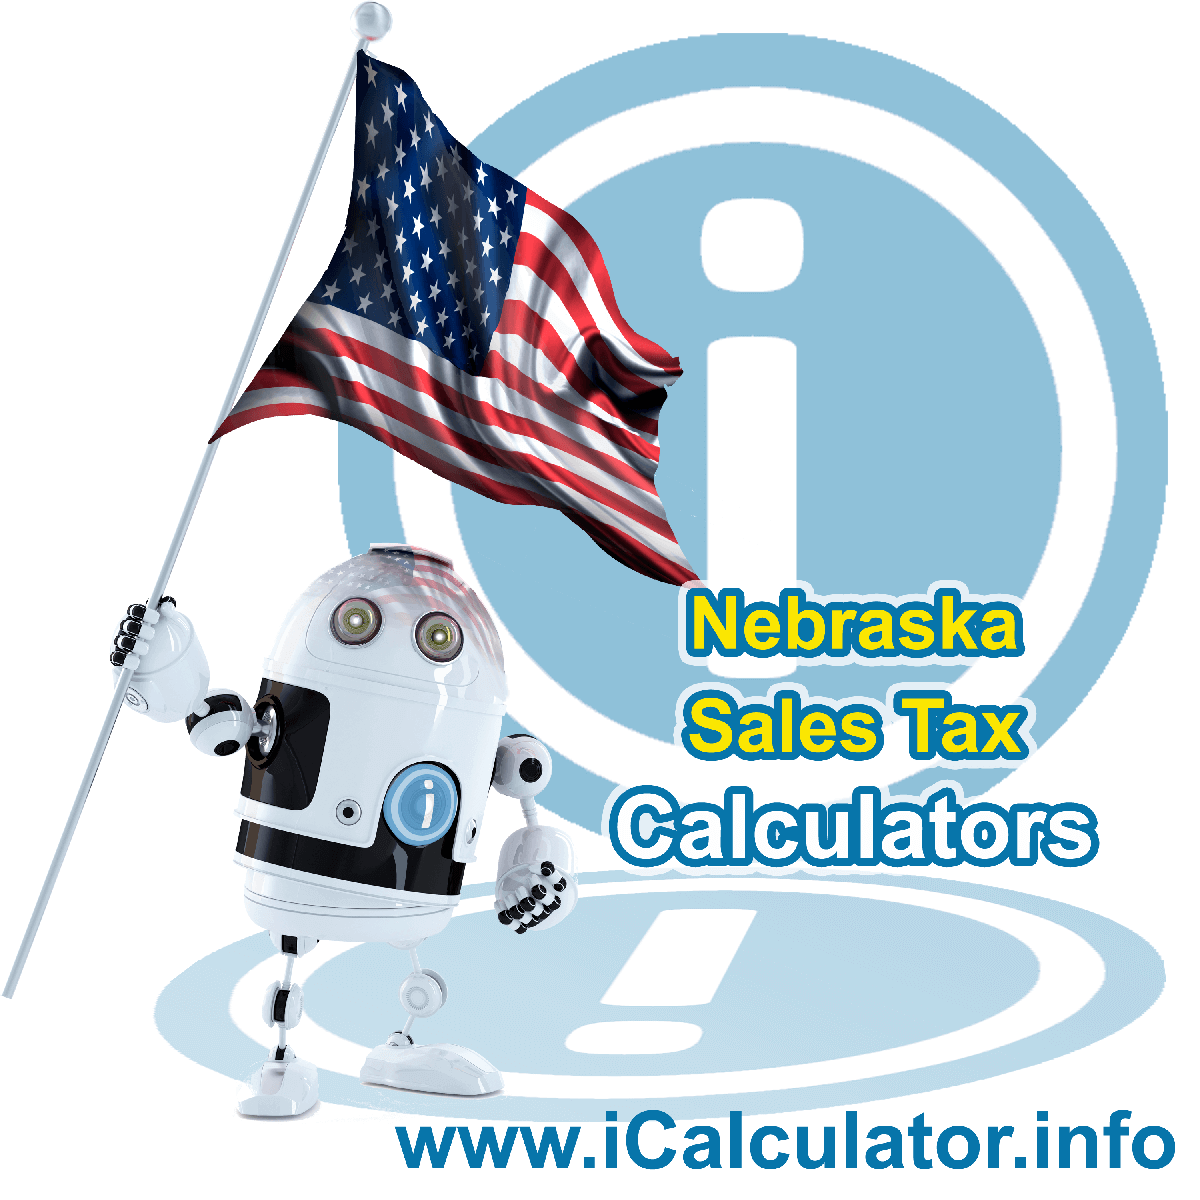 Cozad Sales Rates: This image illustrates a calculator robot calculating Cozad sales tax manually using the Cozad Sales Tax Formula. You can use this information to calculate Cozad Sales Tax manually or use the Cozad Sales Tax Calculator to calculate sales tax online.